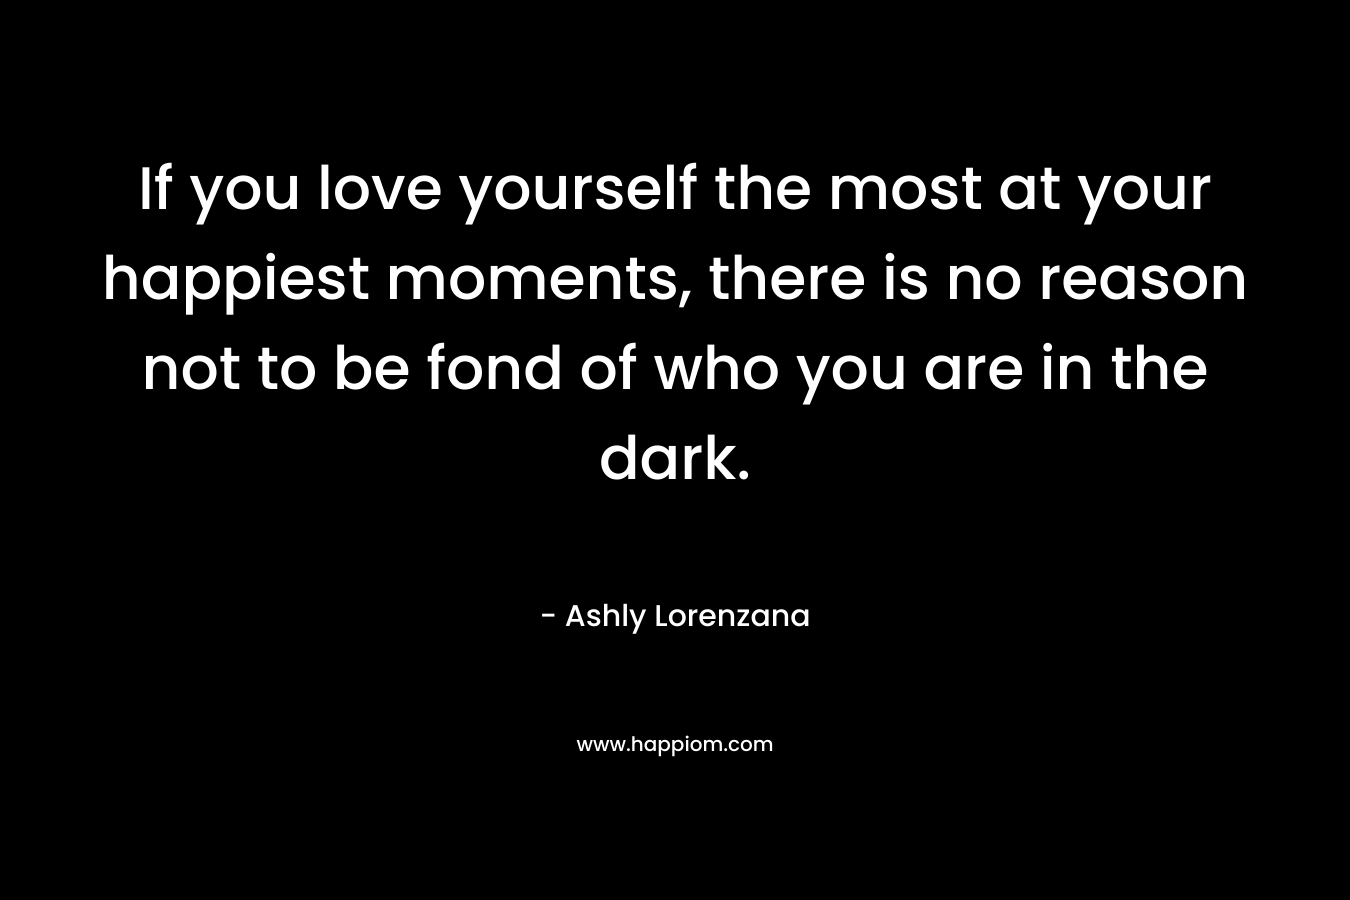 If you love yourself the most at your happiest moments, there is no reason not to be fond of who you are in the dark.